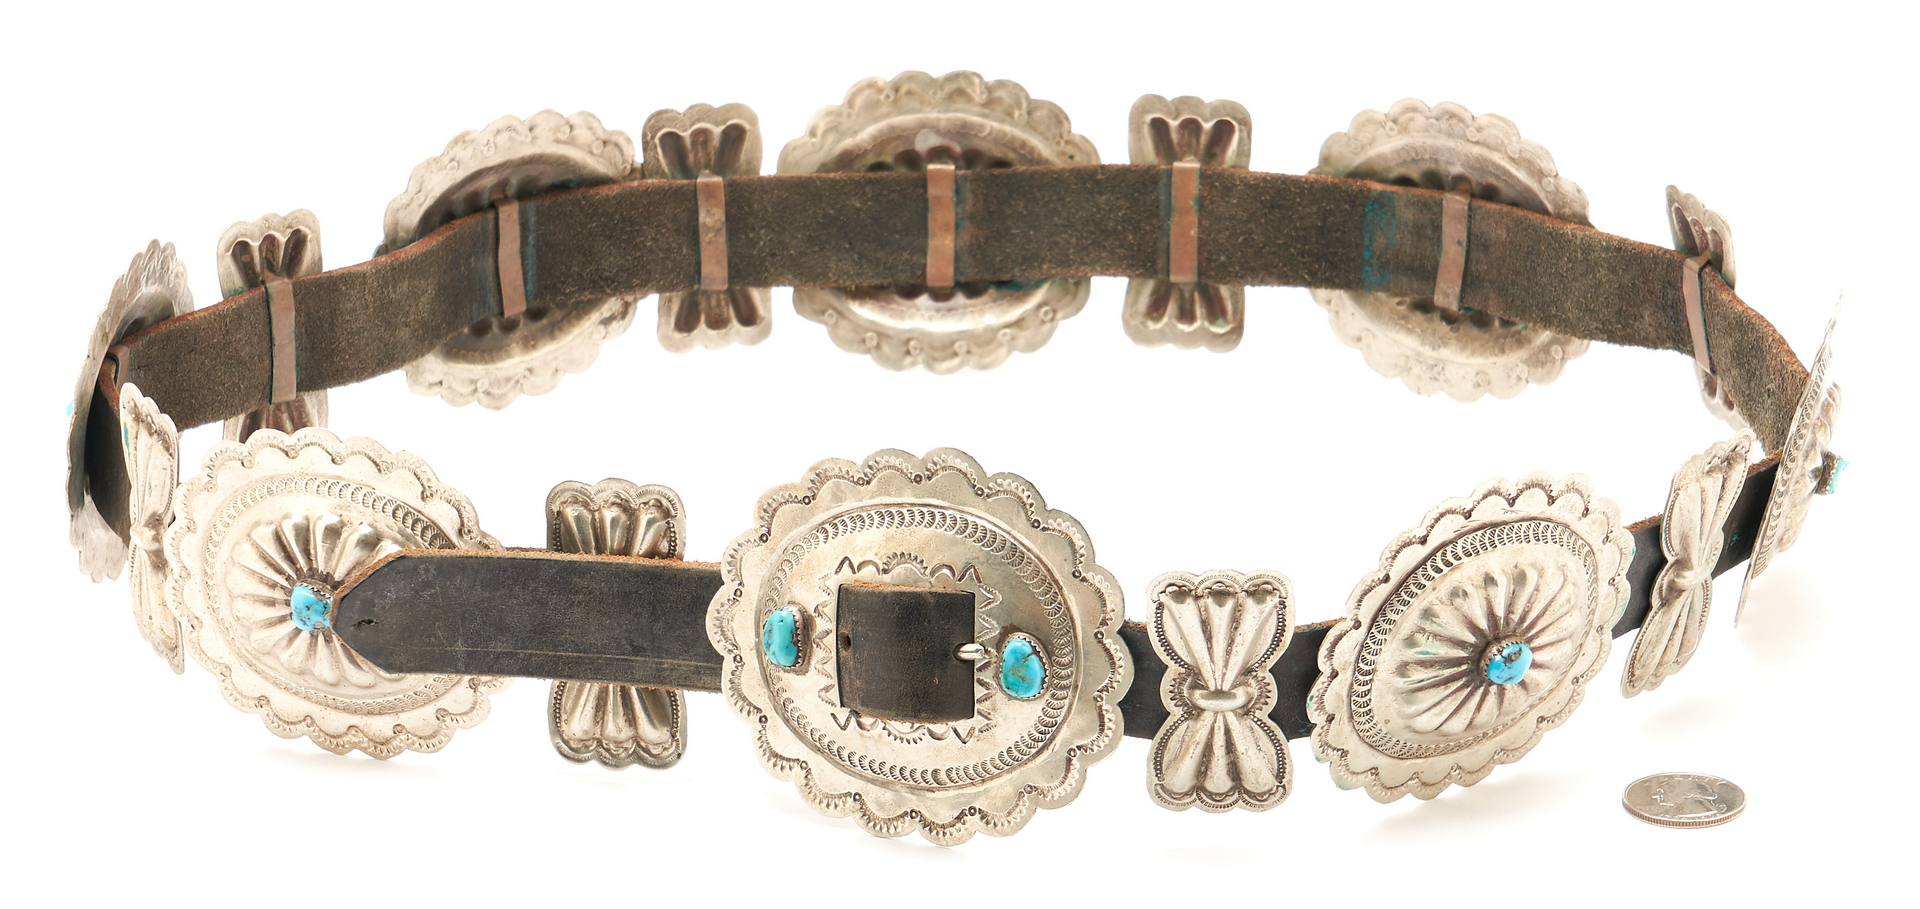 Lot 650:  2 Native American Sterling Silver & Leather Concho Belts